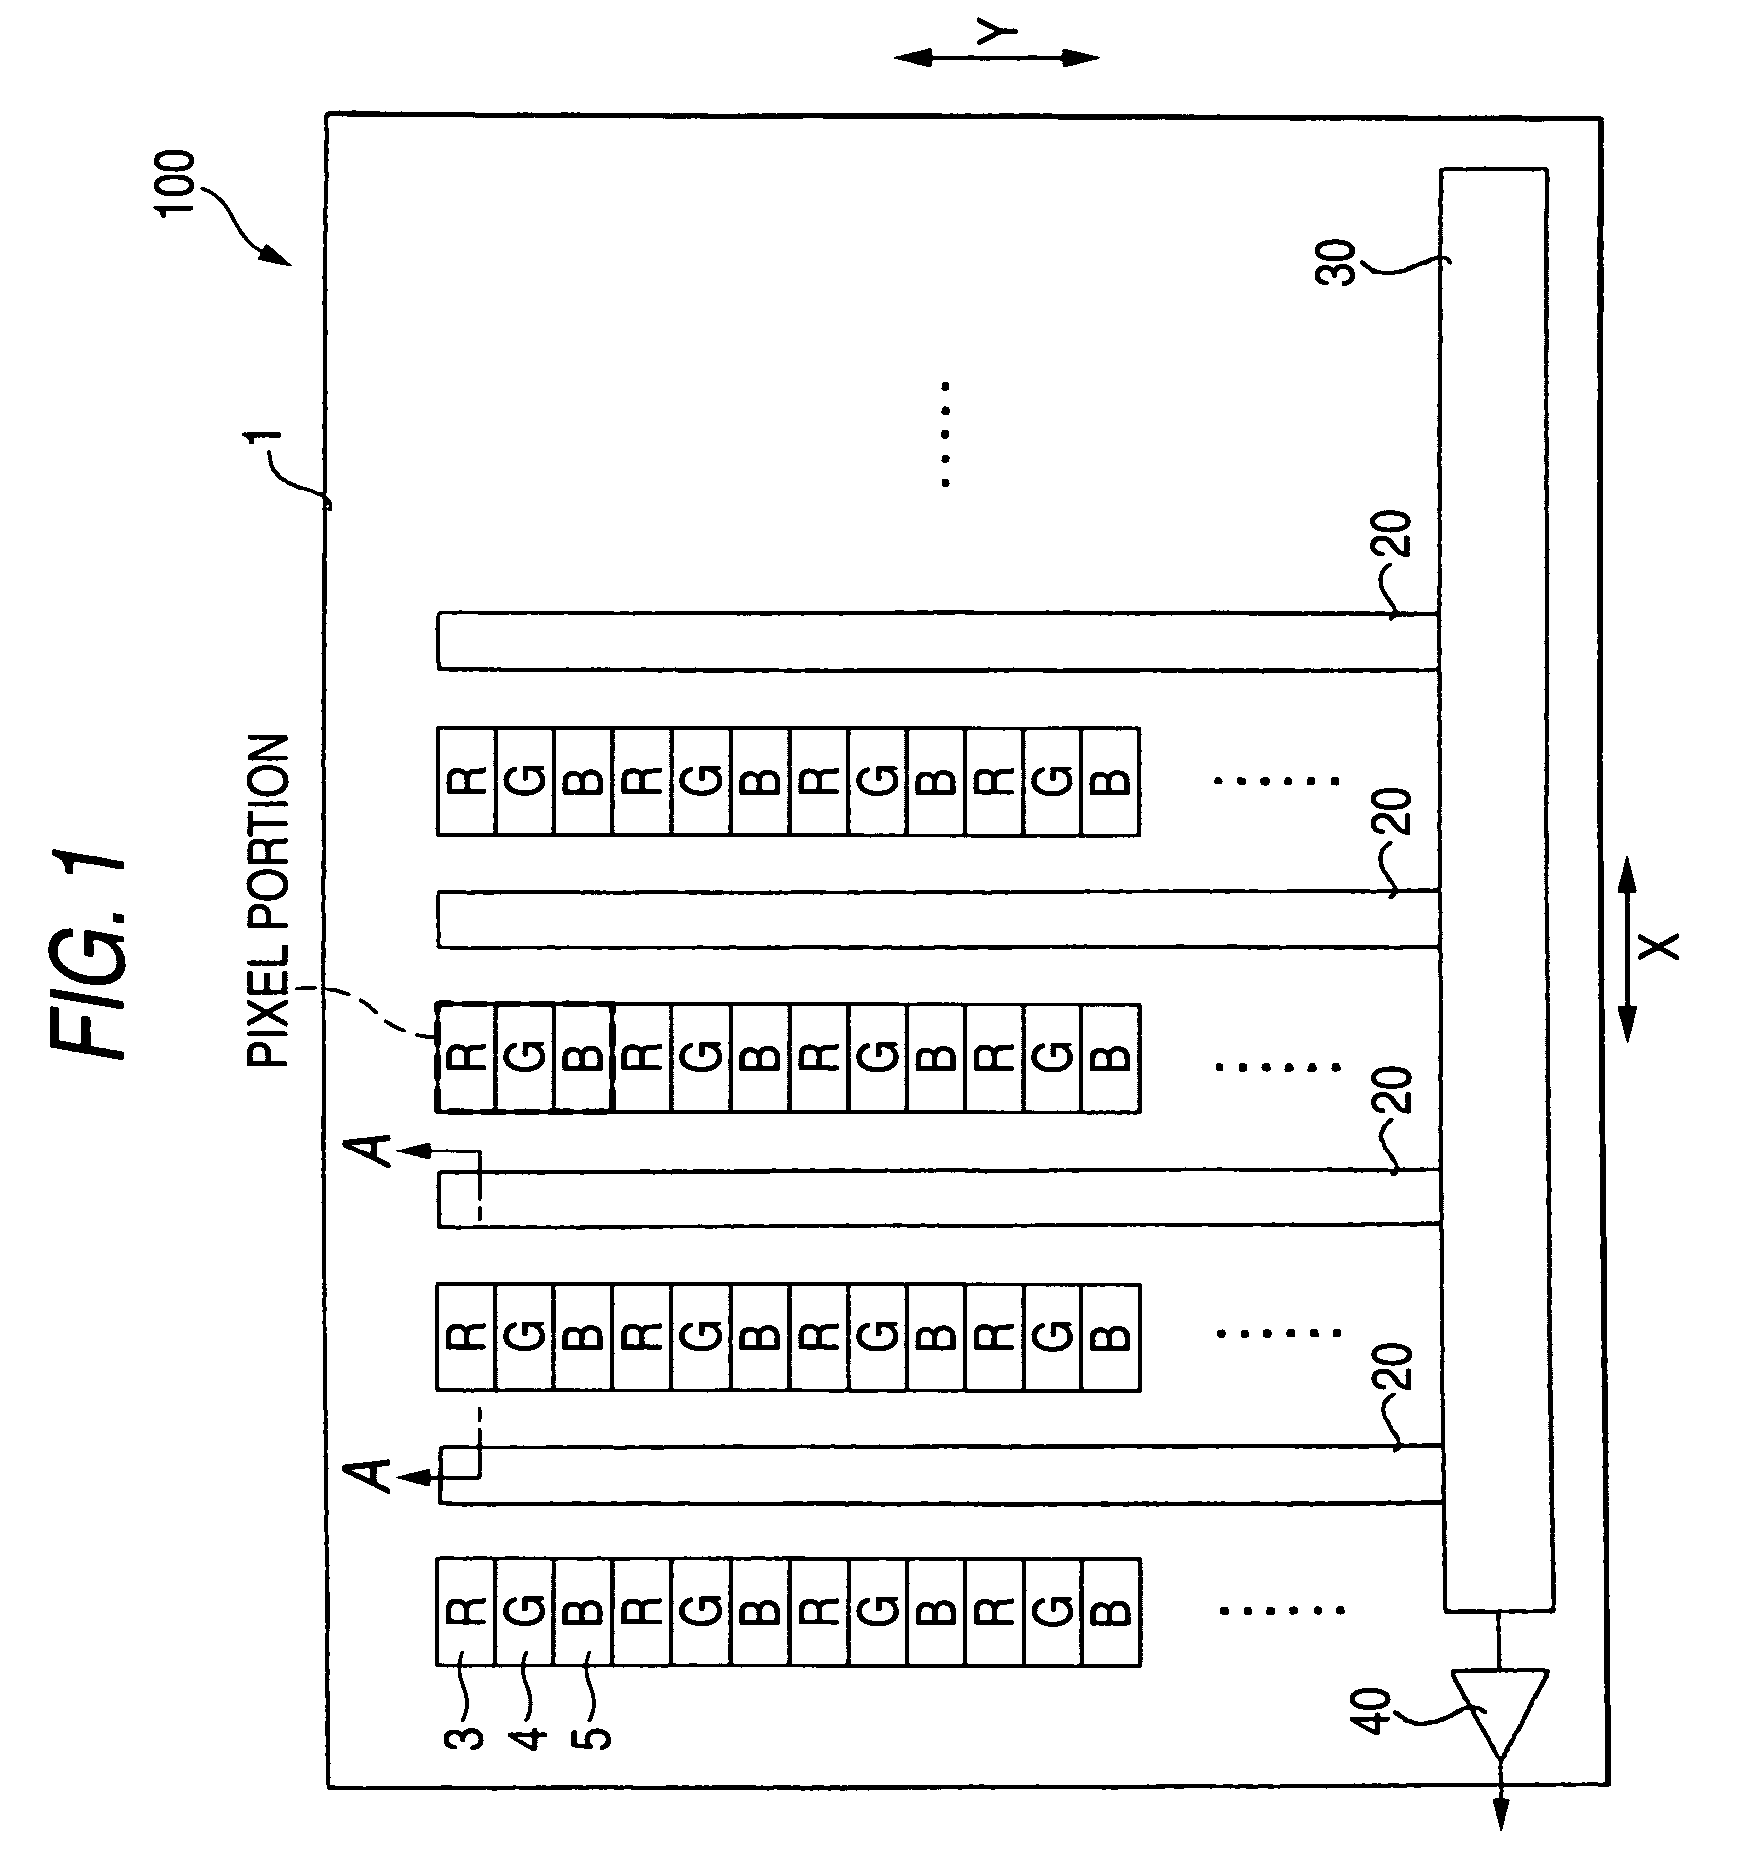 Solid-state image sensing device